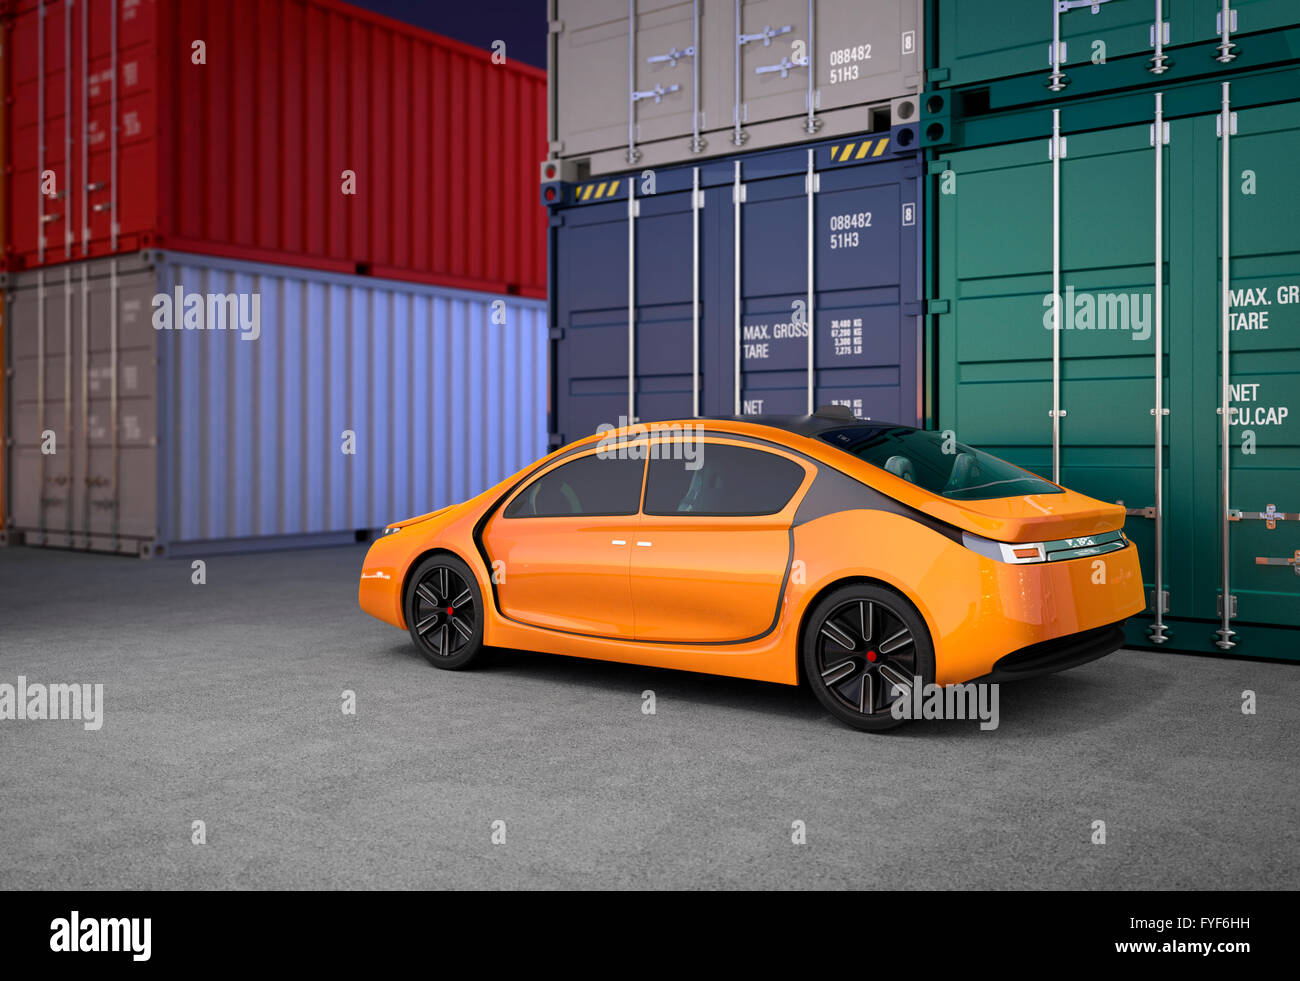 Orange car in cargo containers yard. 3D rendering image. Stock Photo